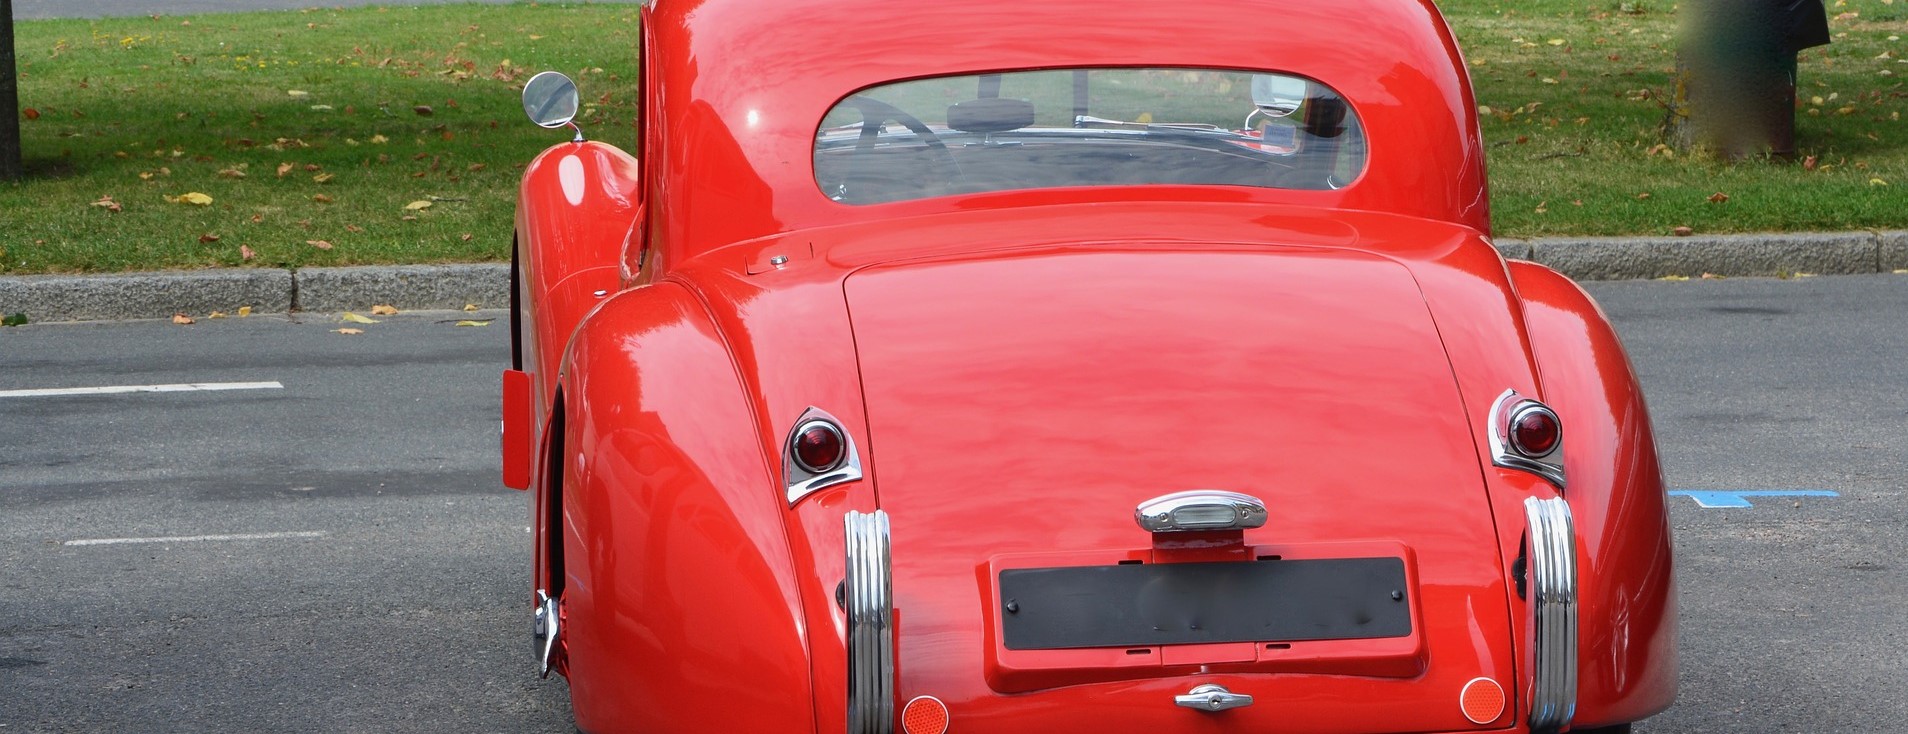 Red Oldtimer Car in New Haven, CT | Breast Cancer Car Donations